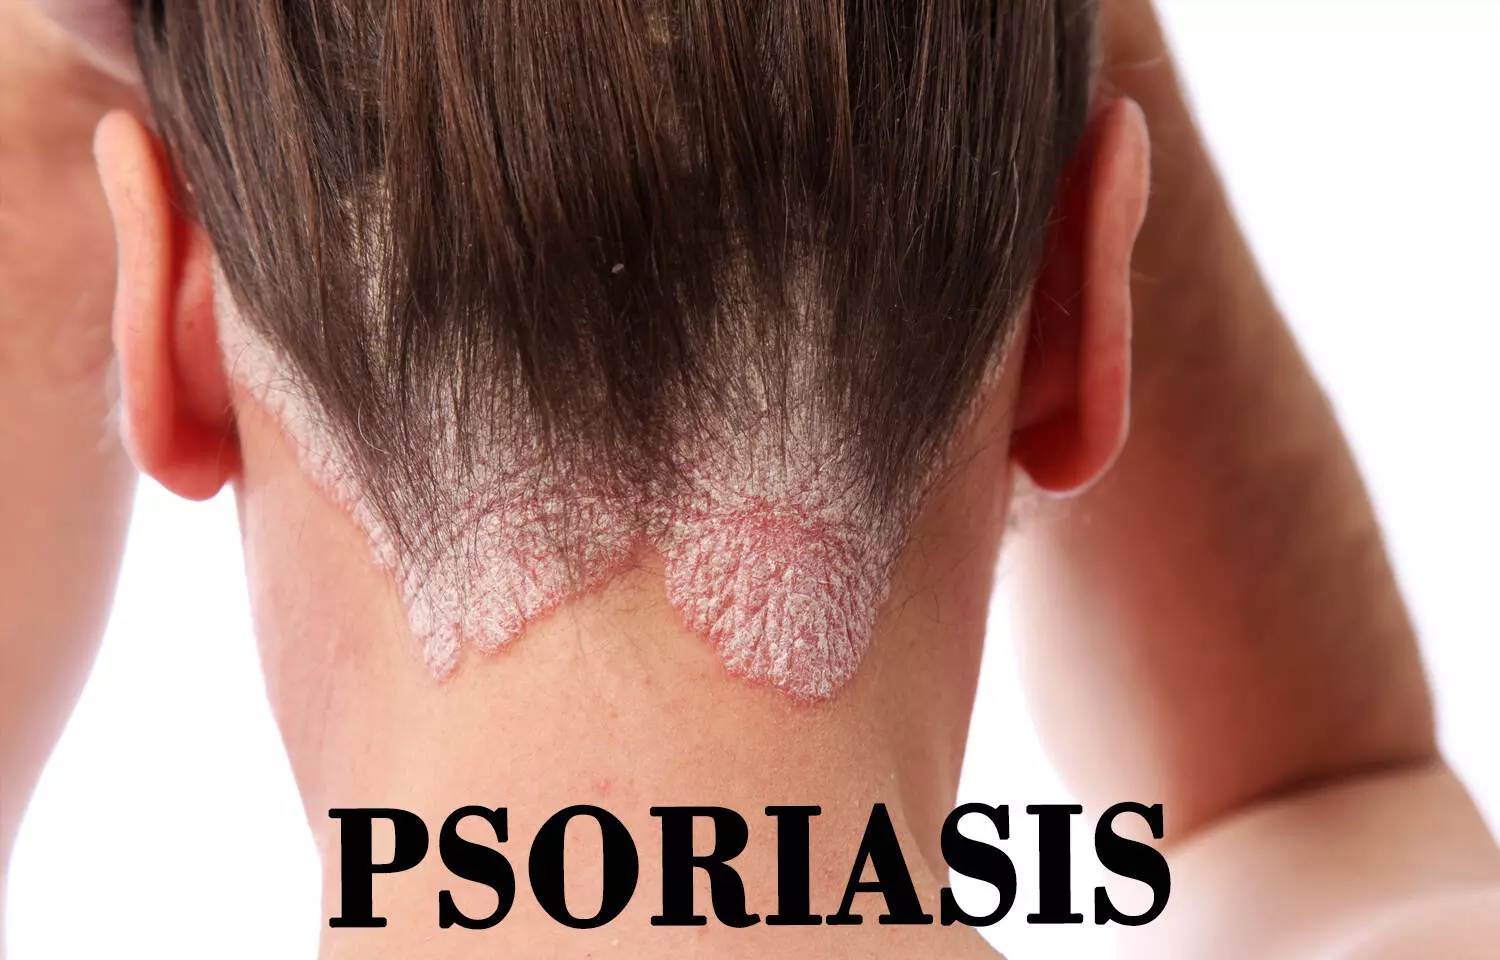 COVID-19 vaccination in psoriasis patients: Latest guidelines